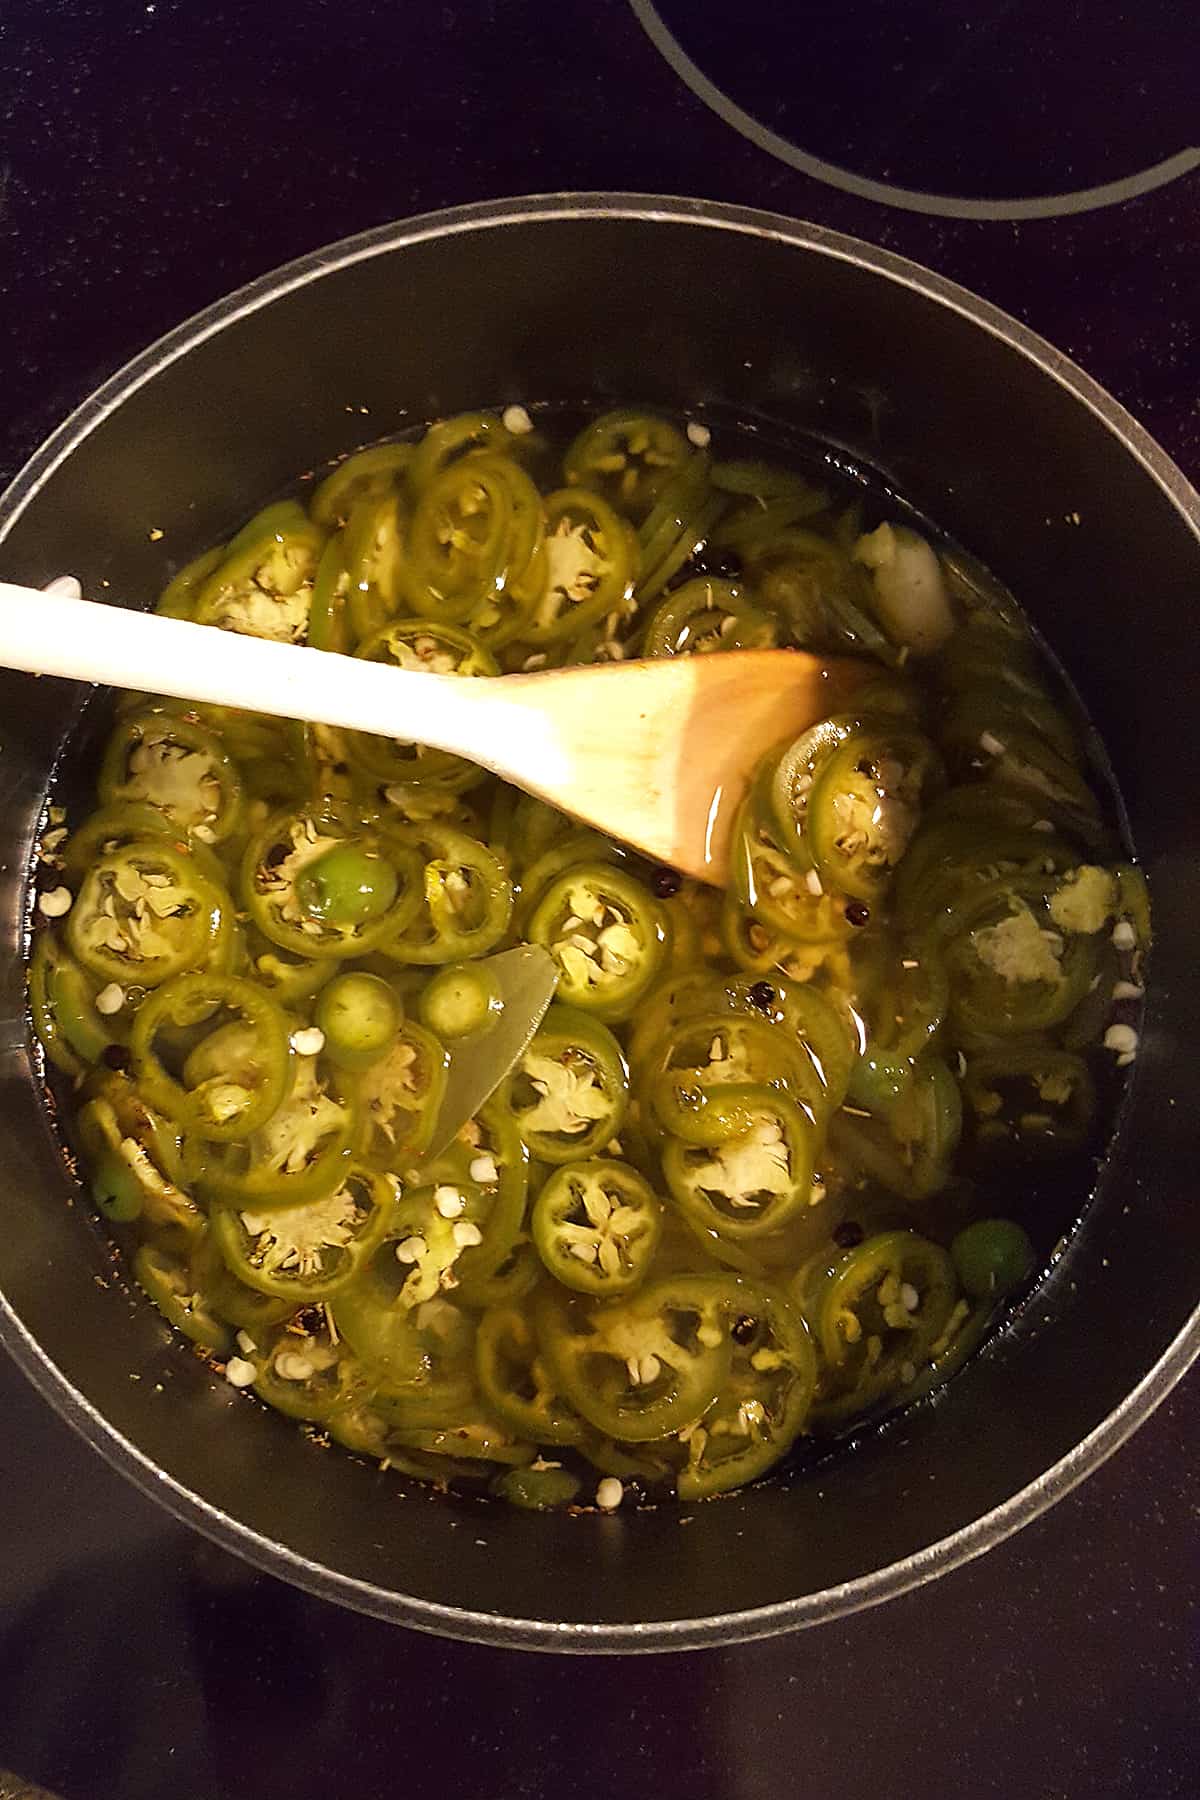 Photo showing jalapeno slices changed in color from bright green to olive green.